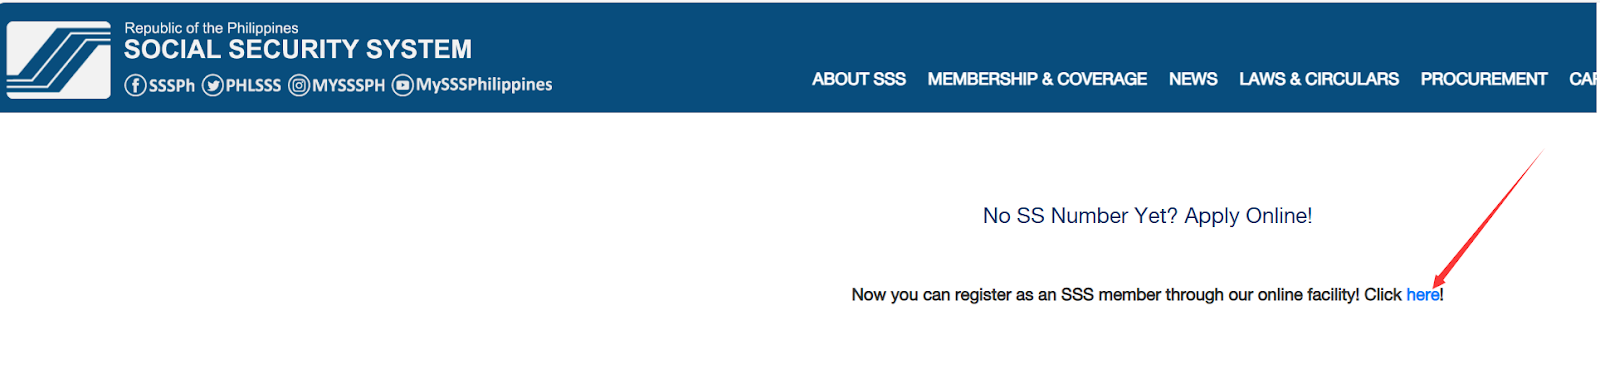 No SS Number yet? Apply Online!